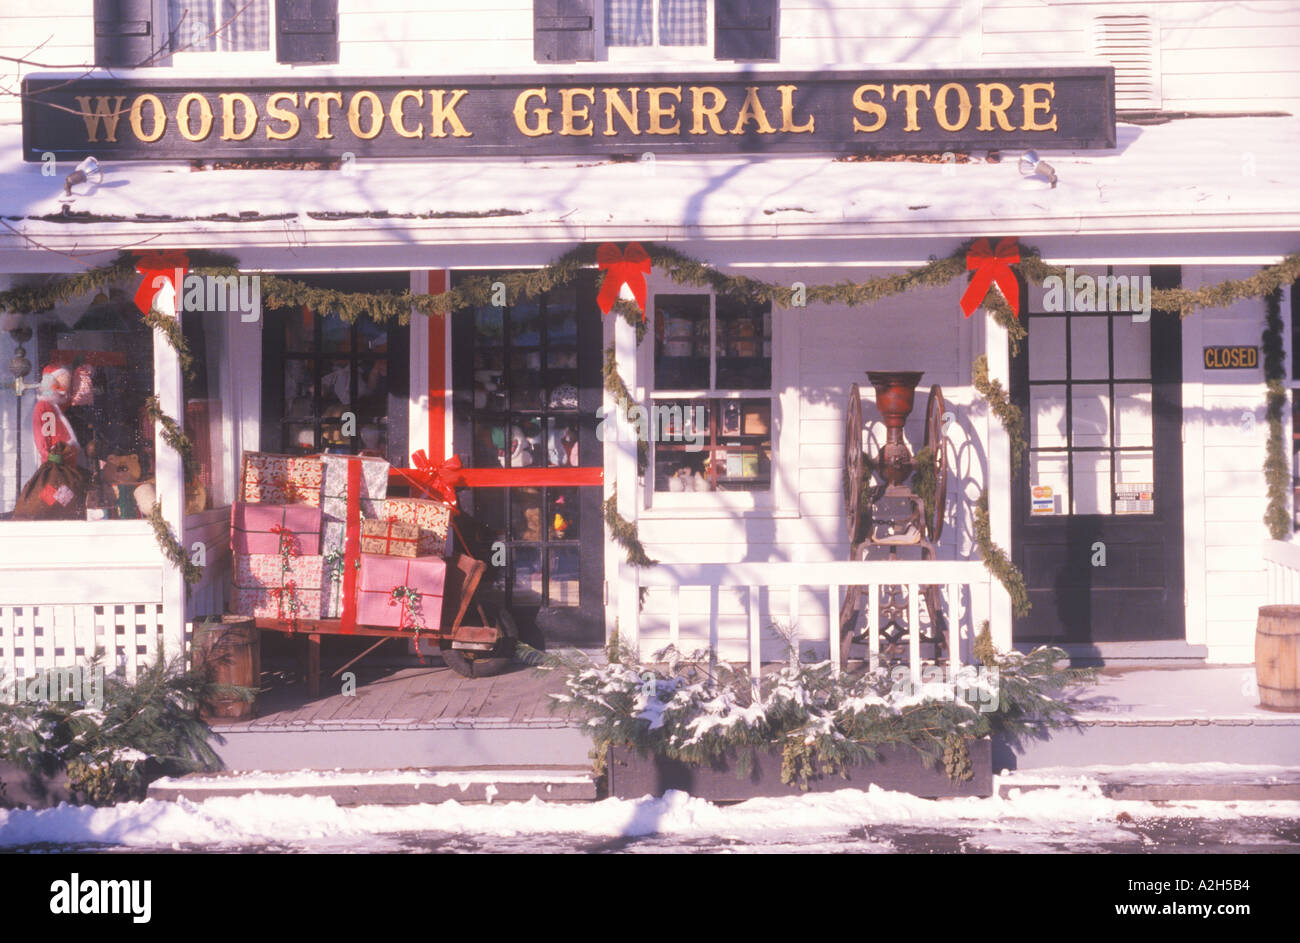 General store decorated for Christmas Woodstock New York 2002 Stock Photo